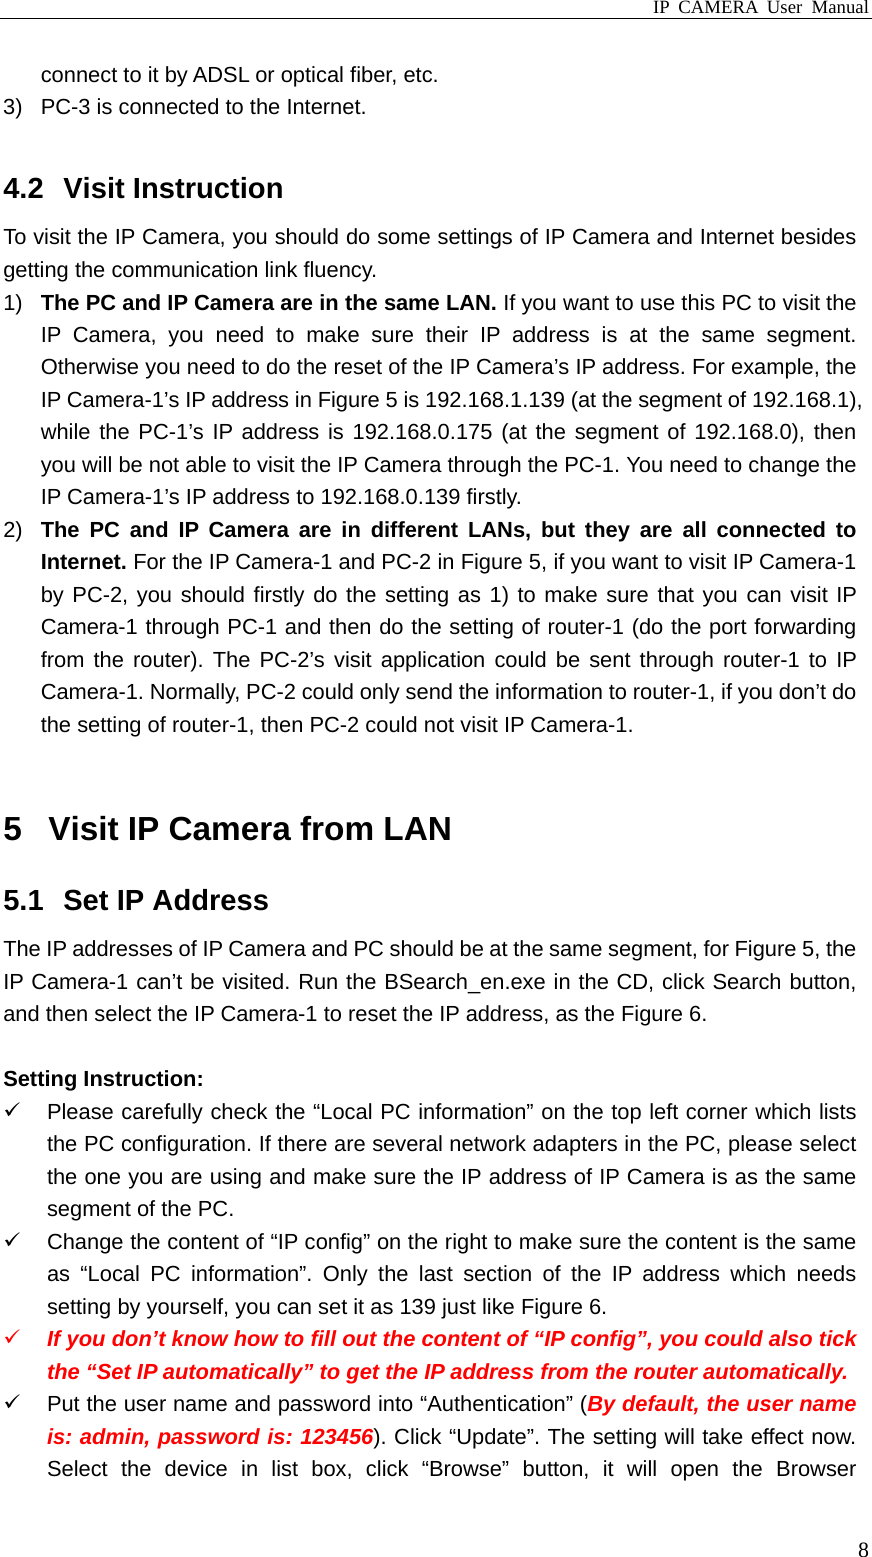 IP CAMERA User Manual  8connect to it by ADSL or optical fiber, etc. 3)  PC-3 is connected to the Internet.  4.2 Visit Instruction To visit the IP Camera, you should do some settings of IP Camera and Internet besides getting the communication link fluency. 1)  The PC and IP Camera are in the same LAN. If you want to use this PC to visit the IP Camera, you need to make sure their IP address is at the same segment. Otherwise you need to do the reset of the IP Camera’s IP address. For example, the IP Camera-1’s IP address in Figure 5 is 192.168.1.139 (at the segment of 192.168.1), while the PC-1’s IP address is 192.168.0.175 (at the segment of 192.168.0), then you will be not able to visit the IP Camera through the PC-1. You need to change the IP Camera-1’s IP address to 192.168.0.139 firstly. 2)  The PC and IP Camera are in different LANs, but they are all connected to Internet. For the IP Camera-1 and PC-2 in Figure 5, if you want to visit IP Camera-1 by PC-2, you should firstly do the setting as 1) to make sure that you can visit IP Camera-1 through PC-1 and then do the setting of router-1 (do the port forwarding from the router). The PC-2’s visit application could be sent through router-1 to IP Camera-1. Normally, PC-2 could only send the information to router-1, if you don’t do the setting of router-1, then PC-2 could not visit IP Camera-1.  5  Visit IP Camera from LAN 5.1  Set IP Address The IP addresses of IP Camera and PC should be at the same segment, for Figure 5, the IP Camera-1 can’t be visited. Run the BSearch_en.exe in the CD, click Search button, and then select the IP Camera-1 to reset the IP address, as the Figure 6.  Setting Instruction: 9  Please carefully check the “Local PC information” on the top left corner which lists the PC configuration. If there are several network adapters in the PC, please select the one you are using and make sure the IP address of IP Camera is as the same segment of the PC. 9  Change the content of “IP config” on the right to make sure the content is the same as “Local PC information”. Only the last section of the IP address which needs setting by yourself, you can set it as 139 just like Figure 6. 9 If you don’t know how to fill out the content of “IP config”, you could also tick the “Set IP automatically” to get the IP address from the router automatically. 9  Put the user name and password into “Authentication” (By default, the user name is: admin, password is: 123456). Click “Update”. The setting will take effect now. Select the device in list box, click “Browse” button, it will open the Browser 